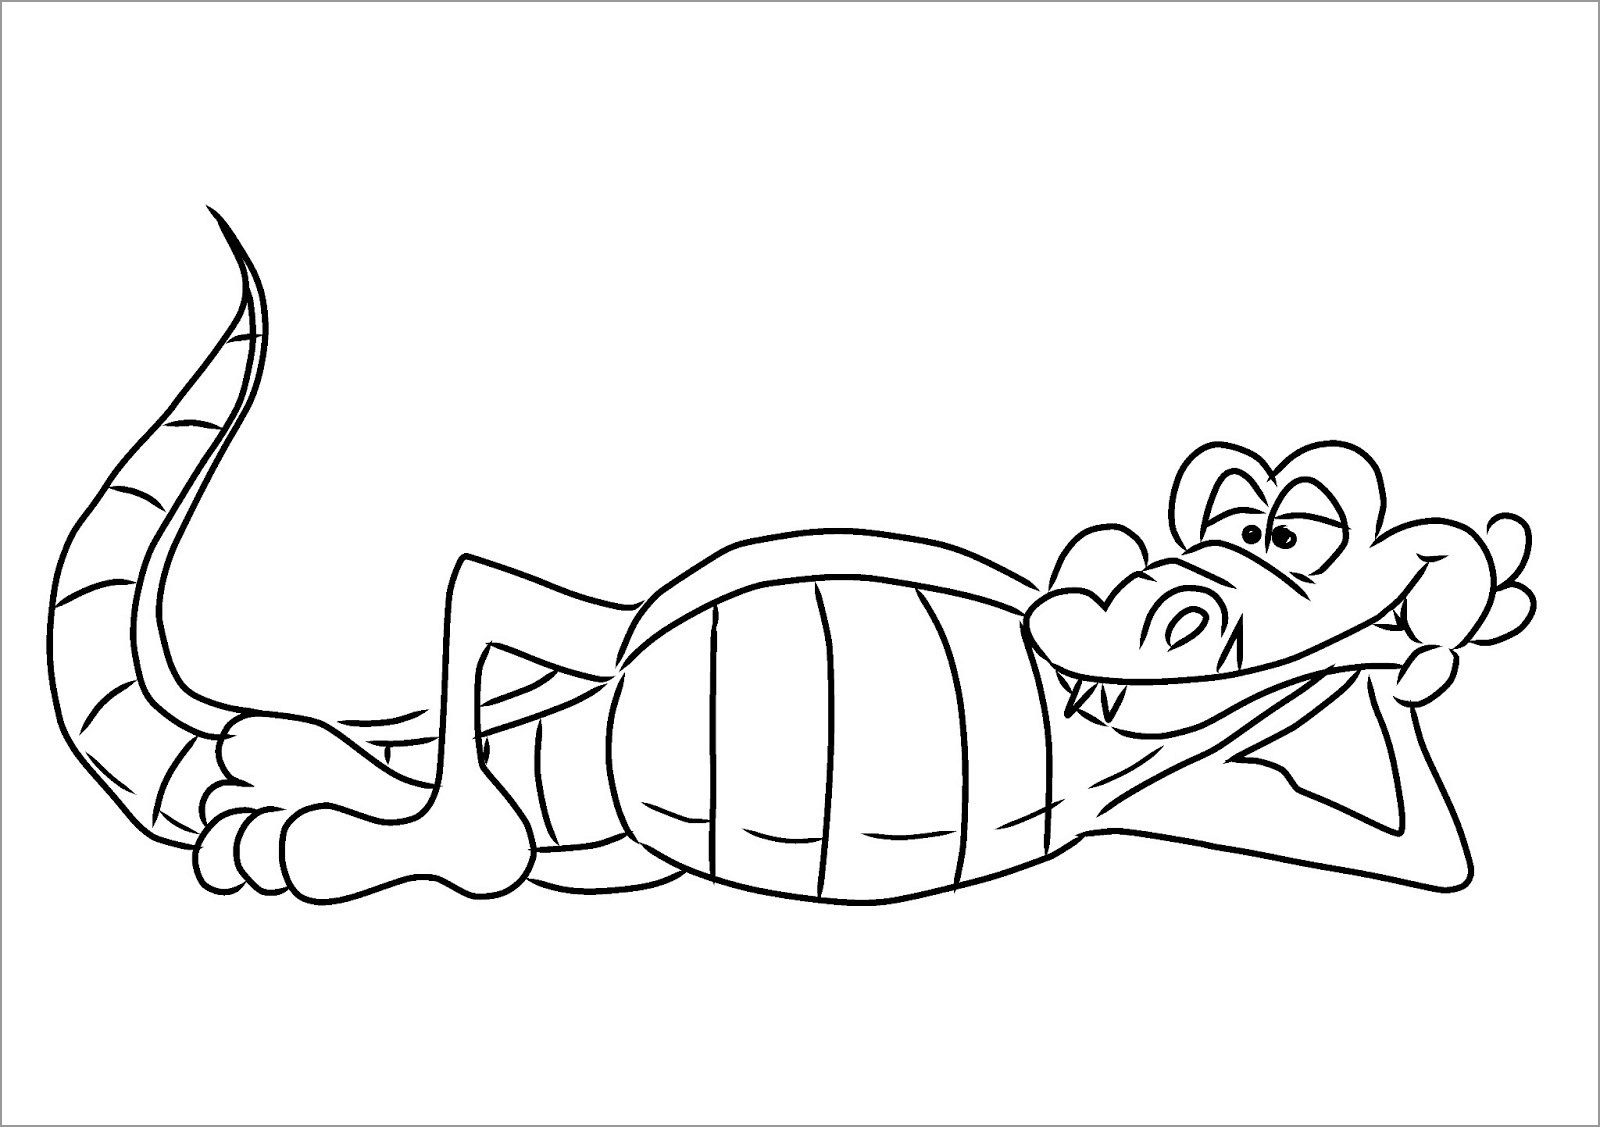 Crocodile Coloring Pages for Kids